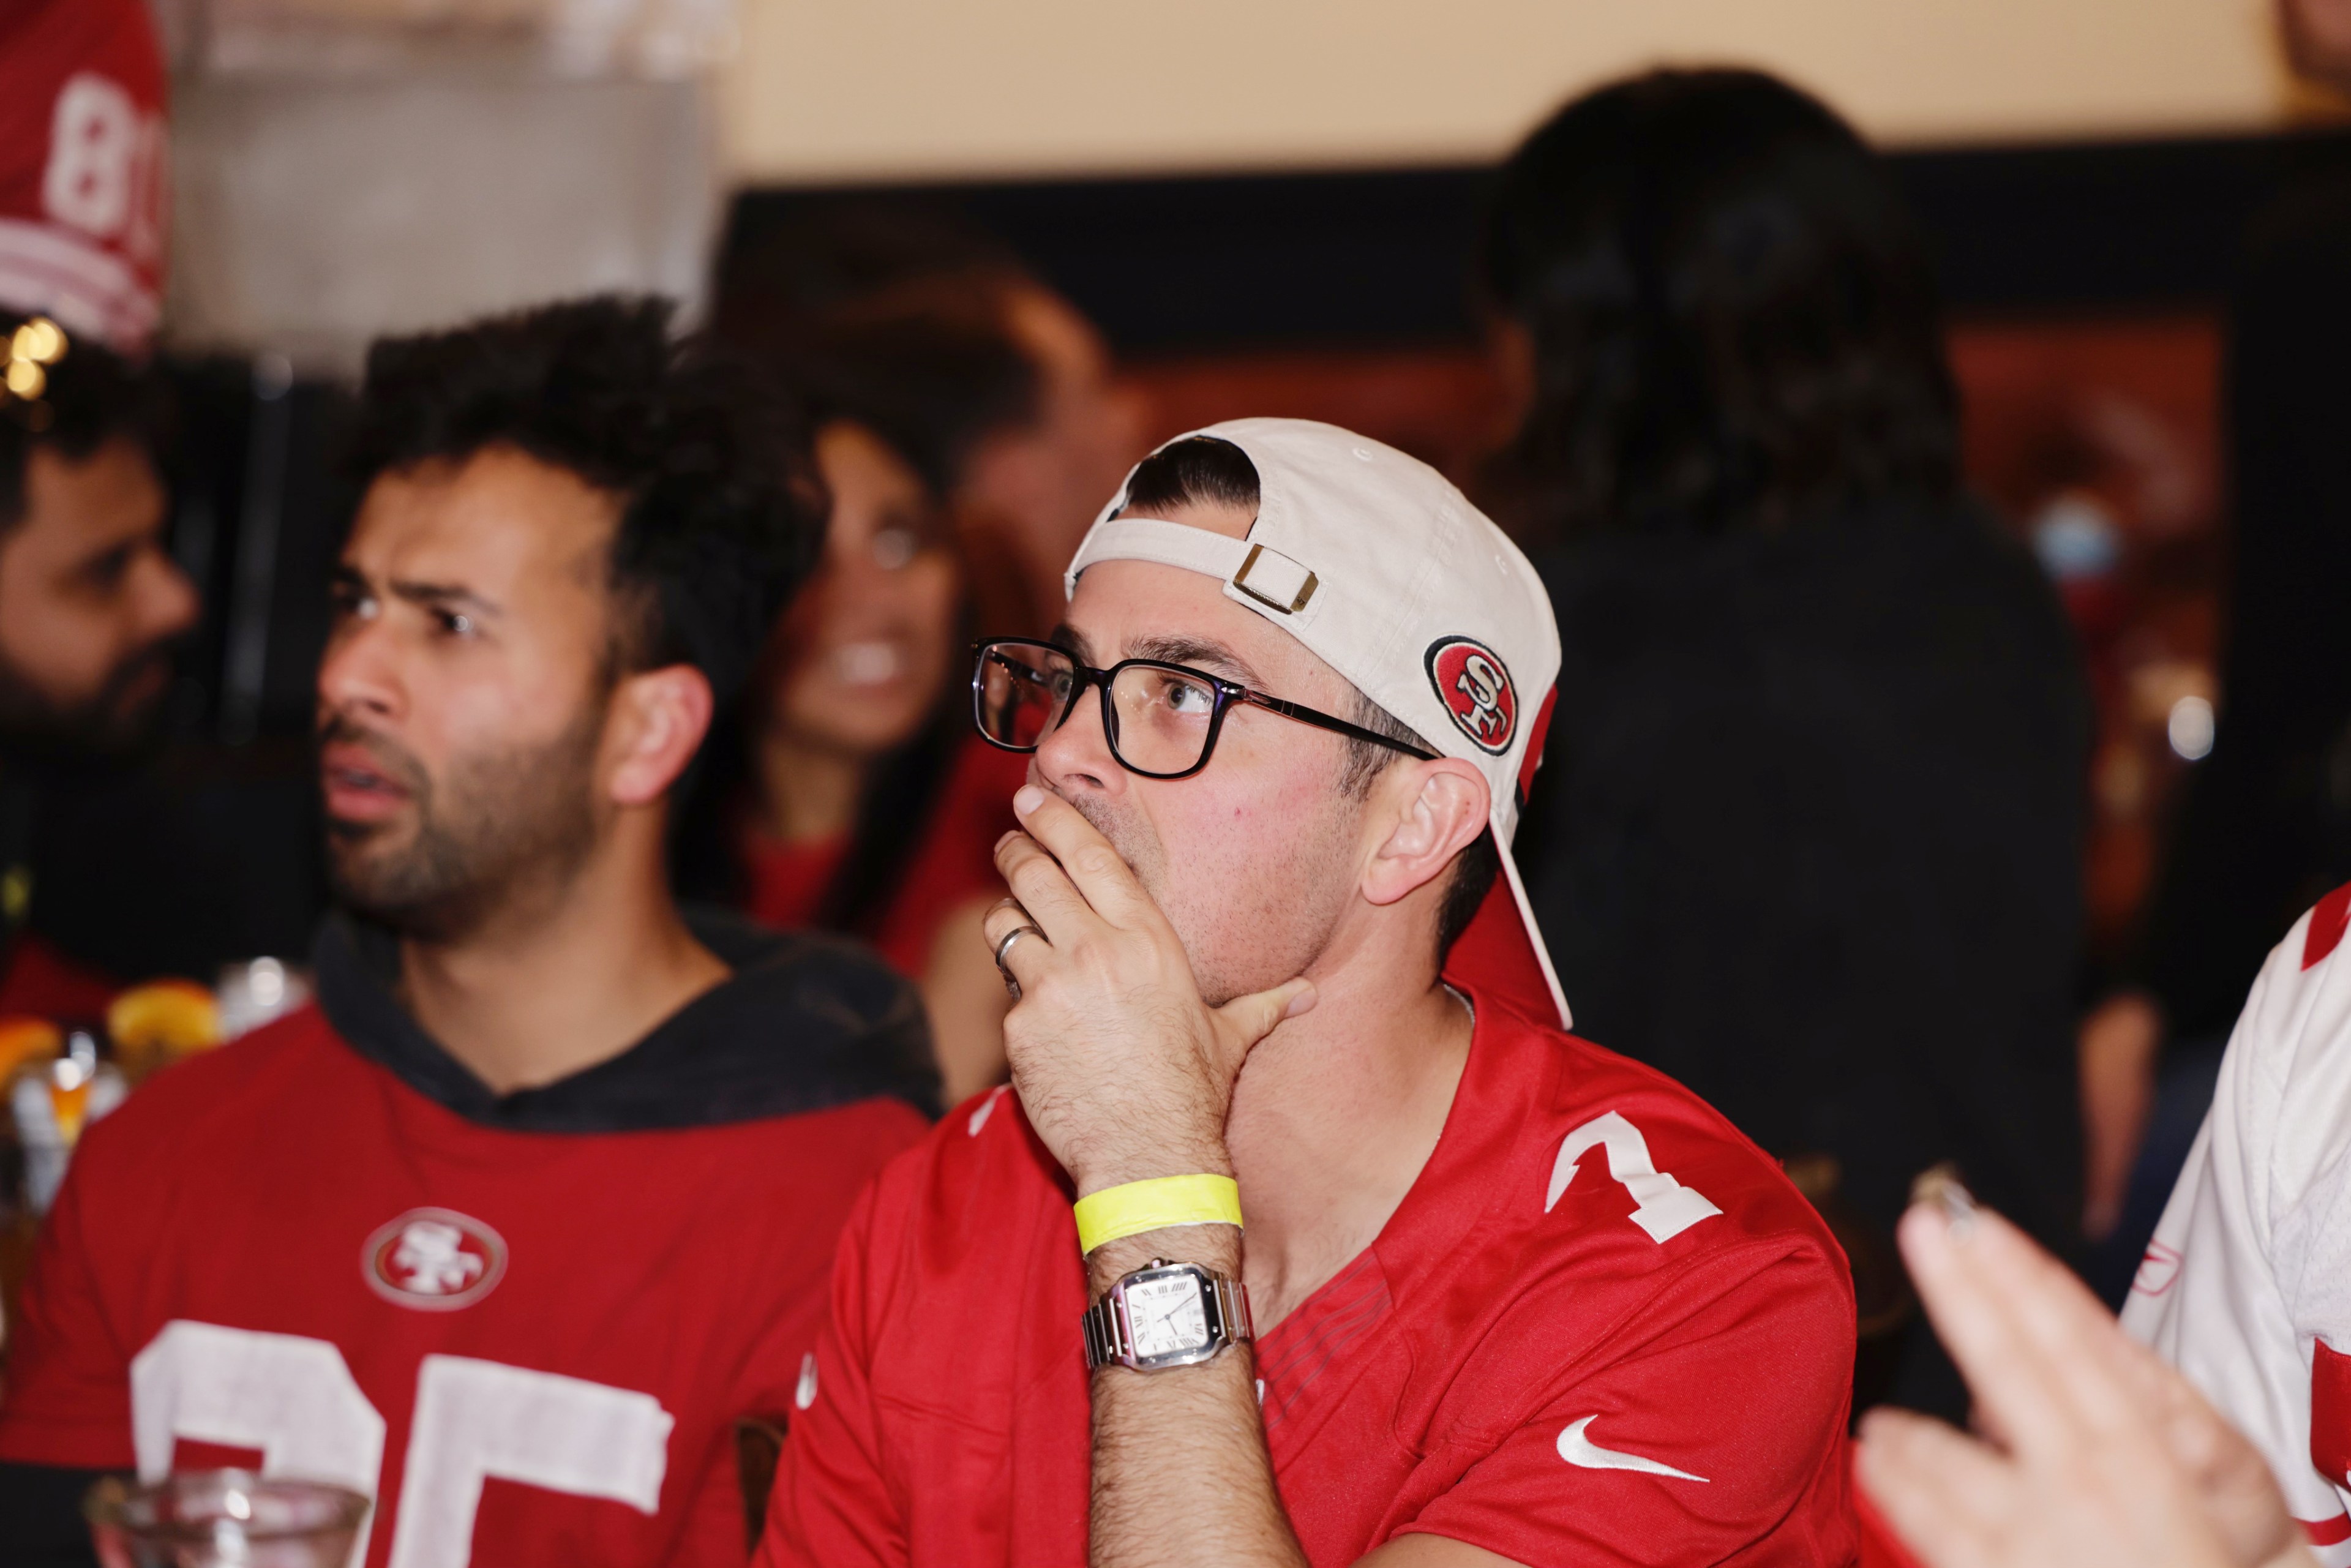 49ers fan holds hand to face while watching game